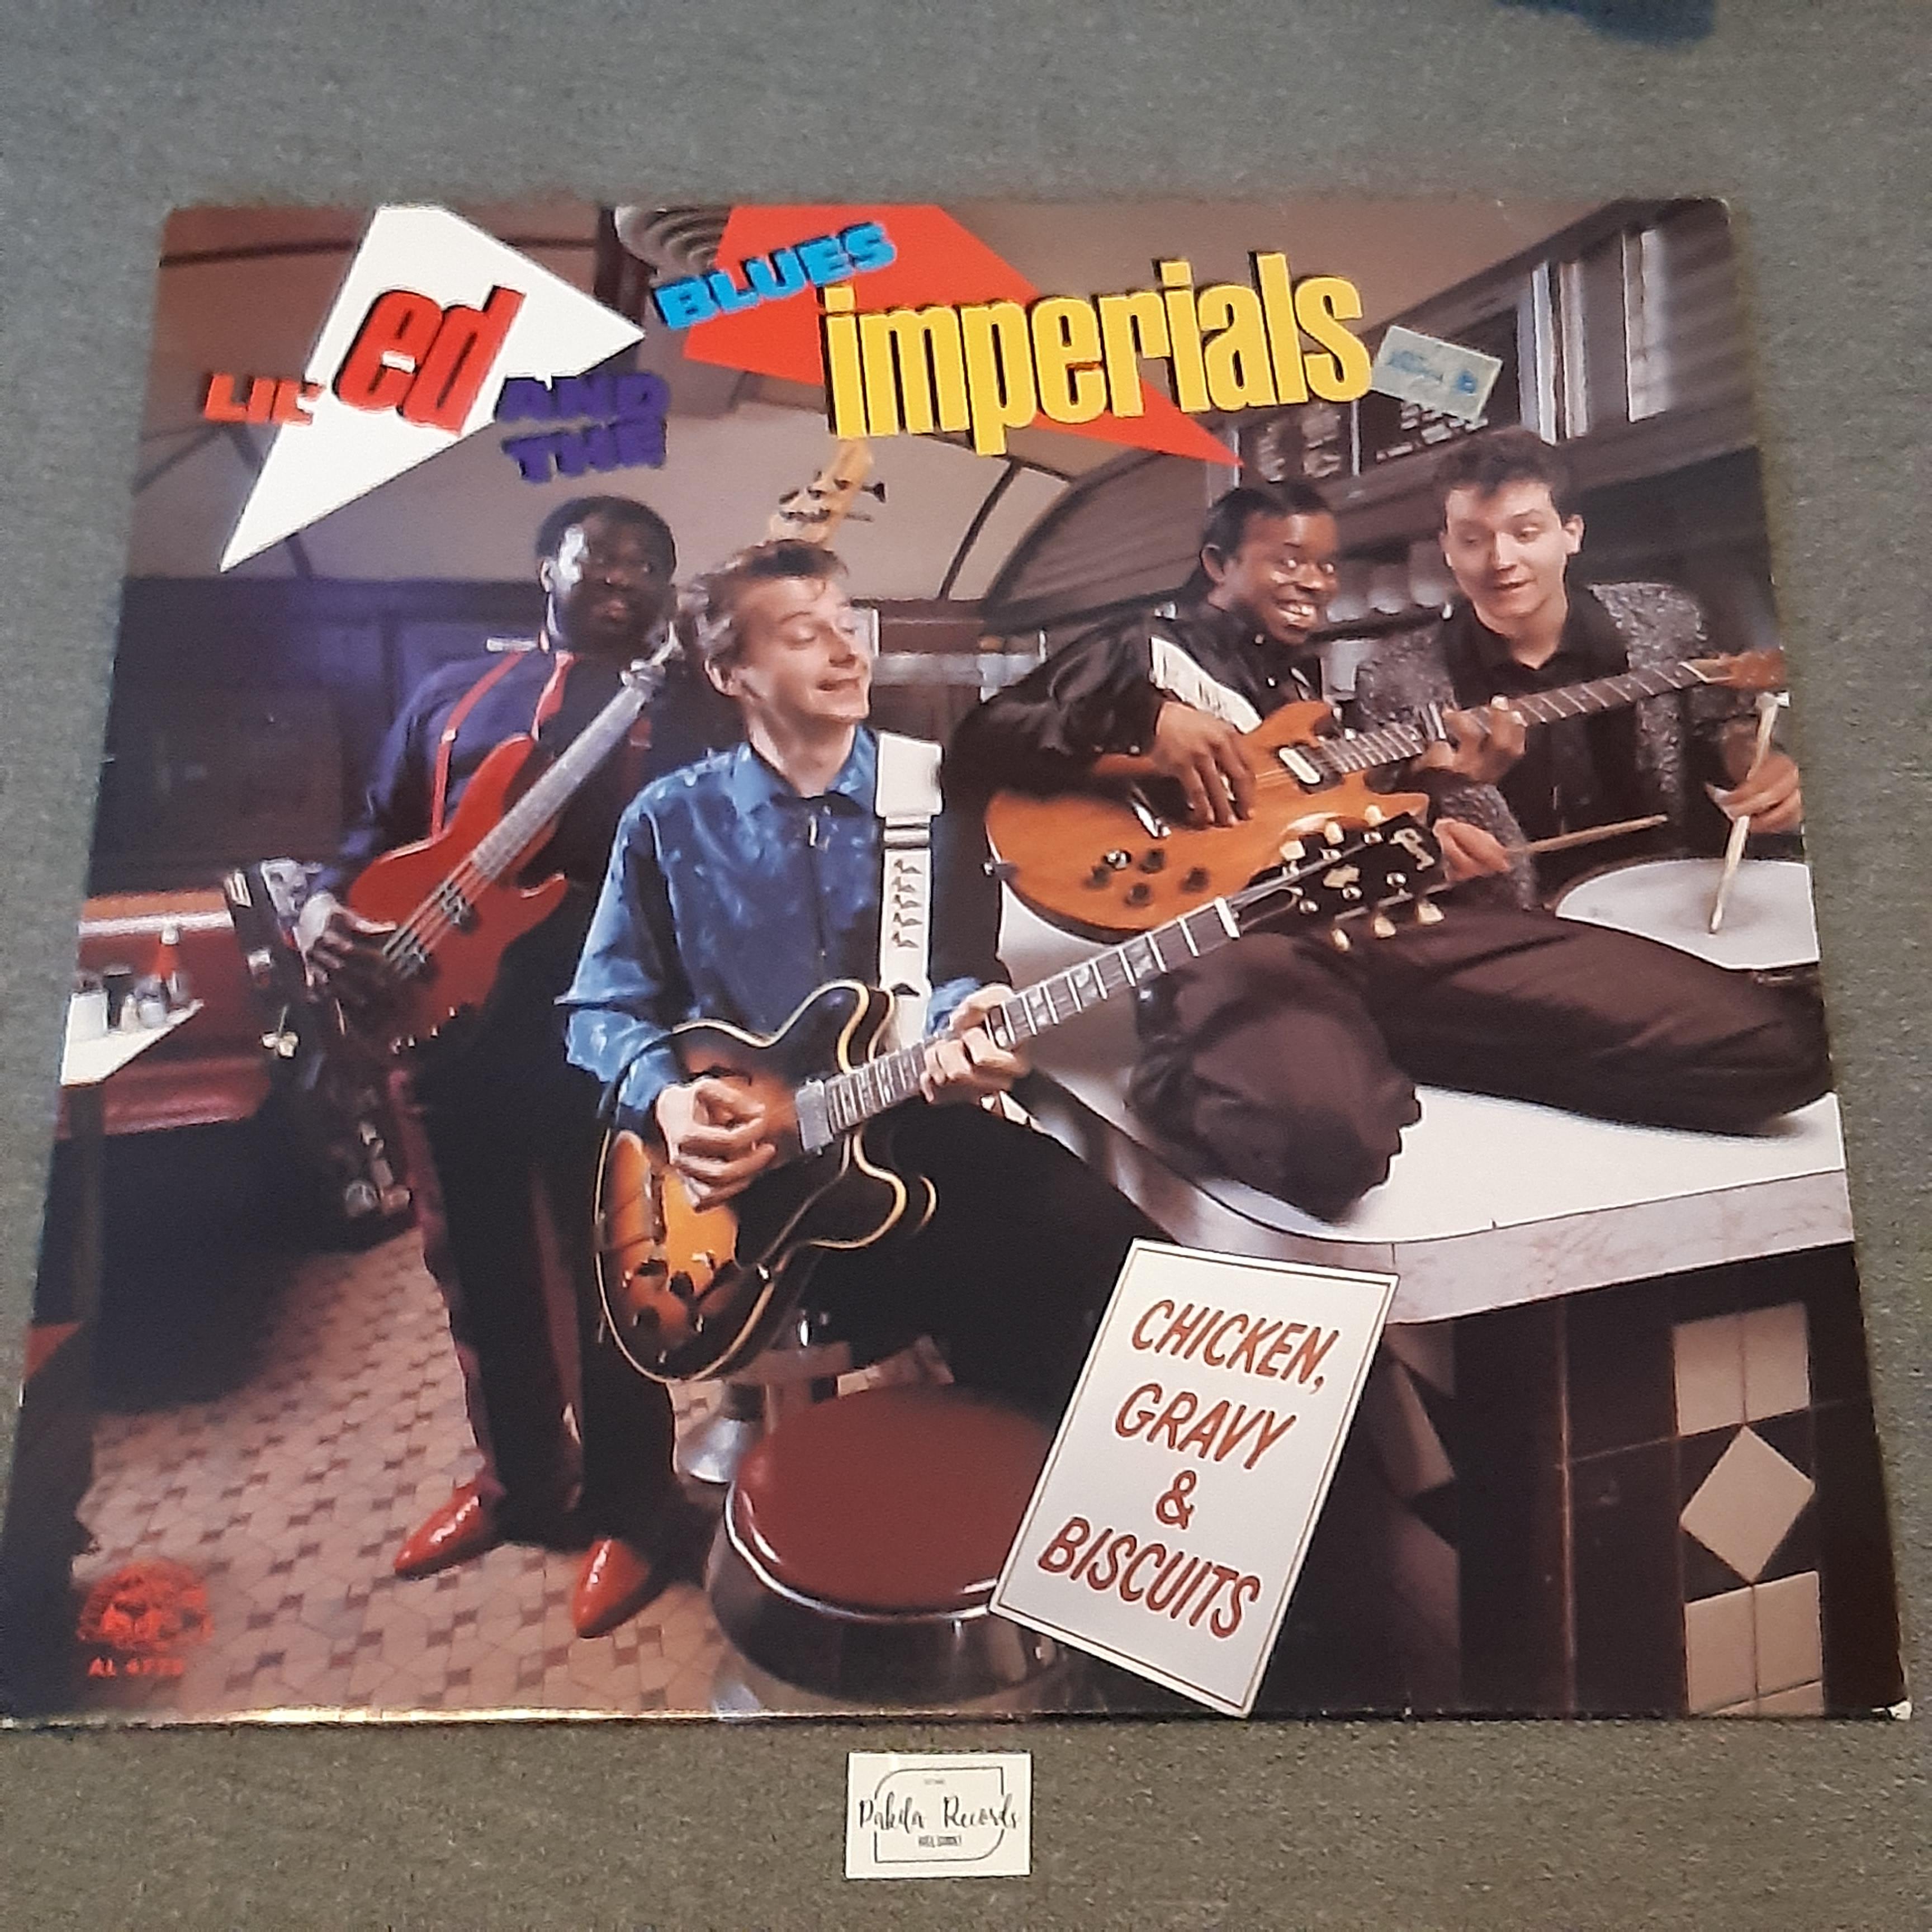 Lil' Ed And The Blues Imperials - Chicken, Gravy & Biscuits - LP (käytetty)